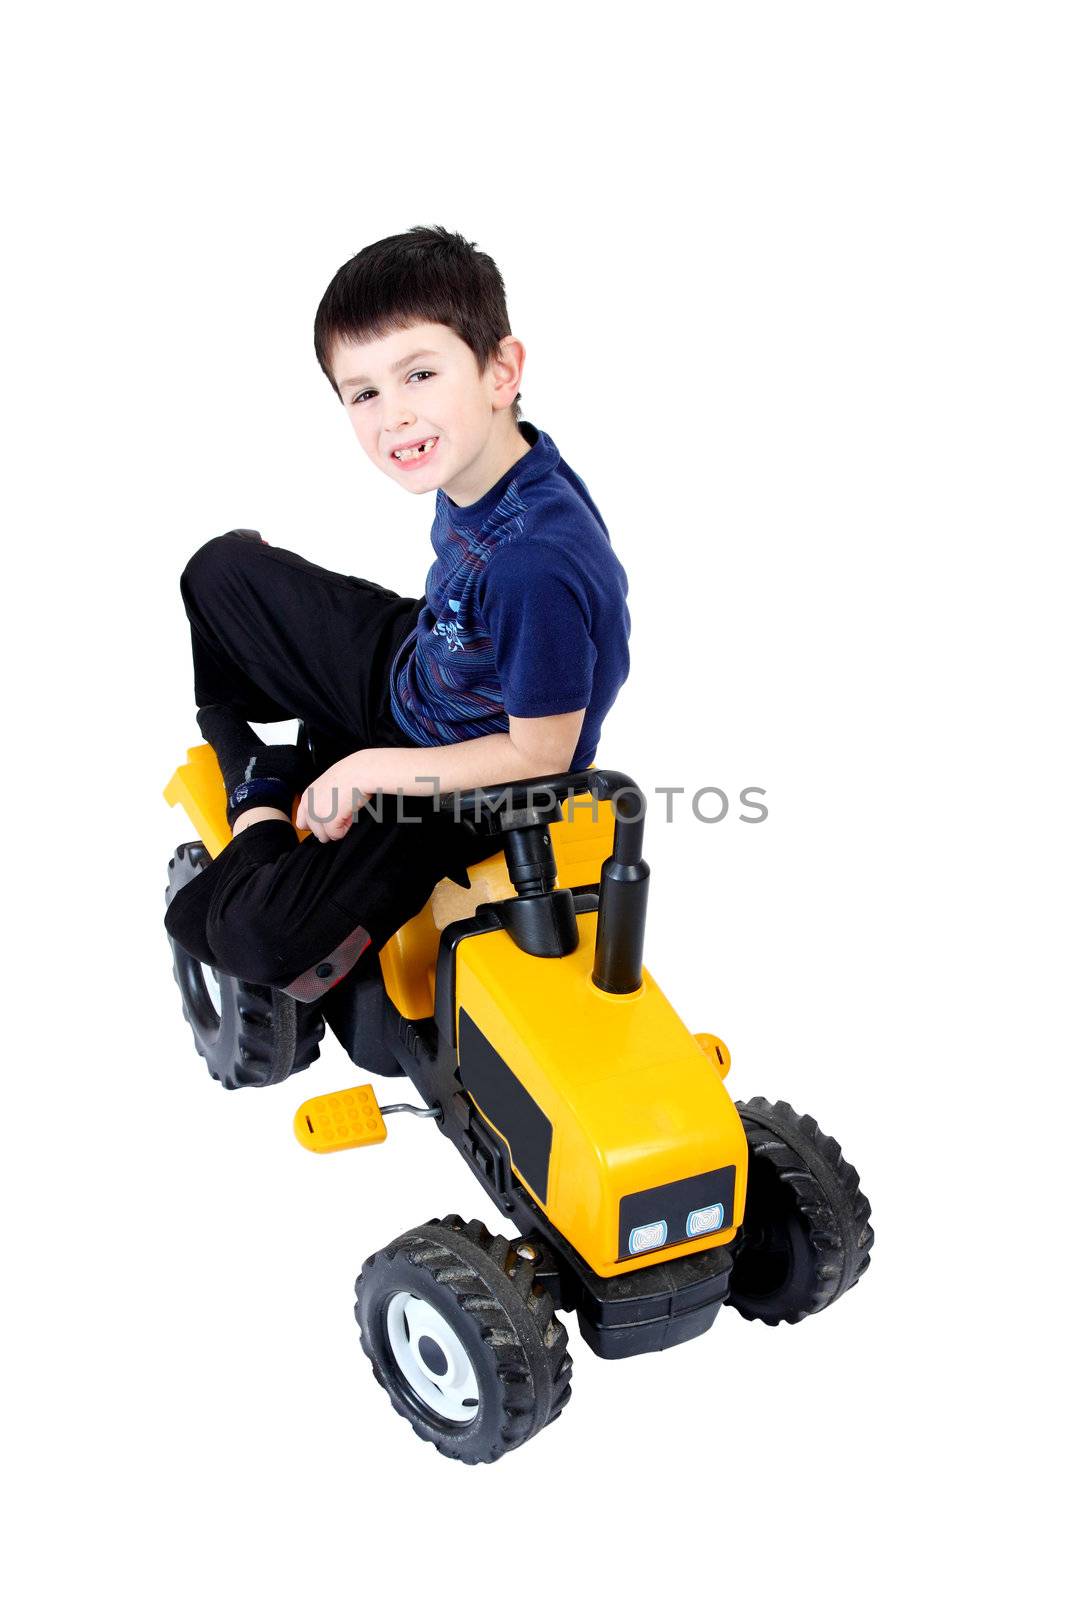 small boy on the yellow tractor by artush